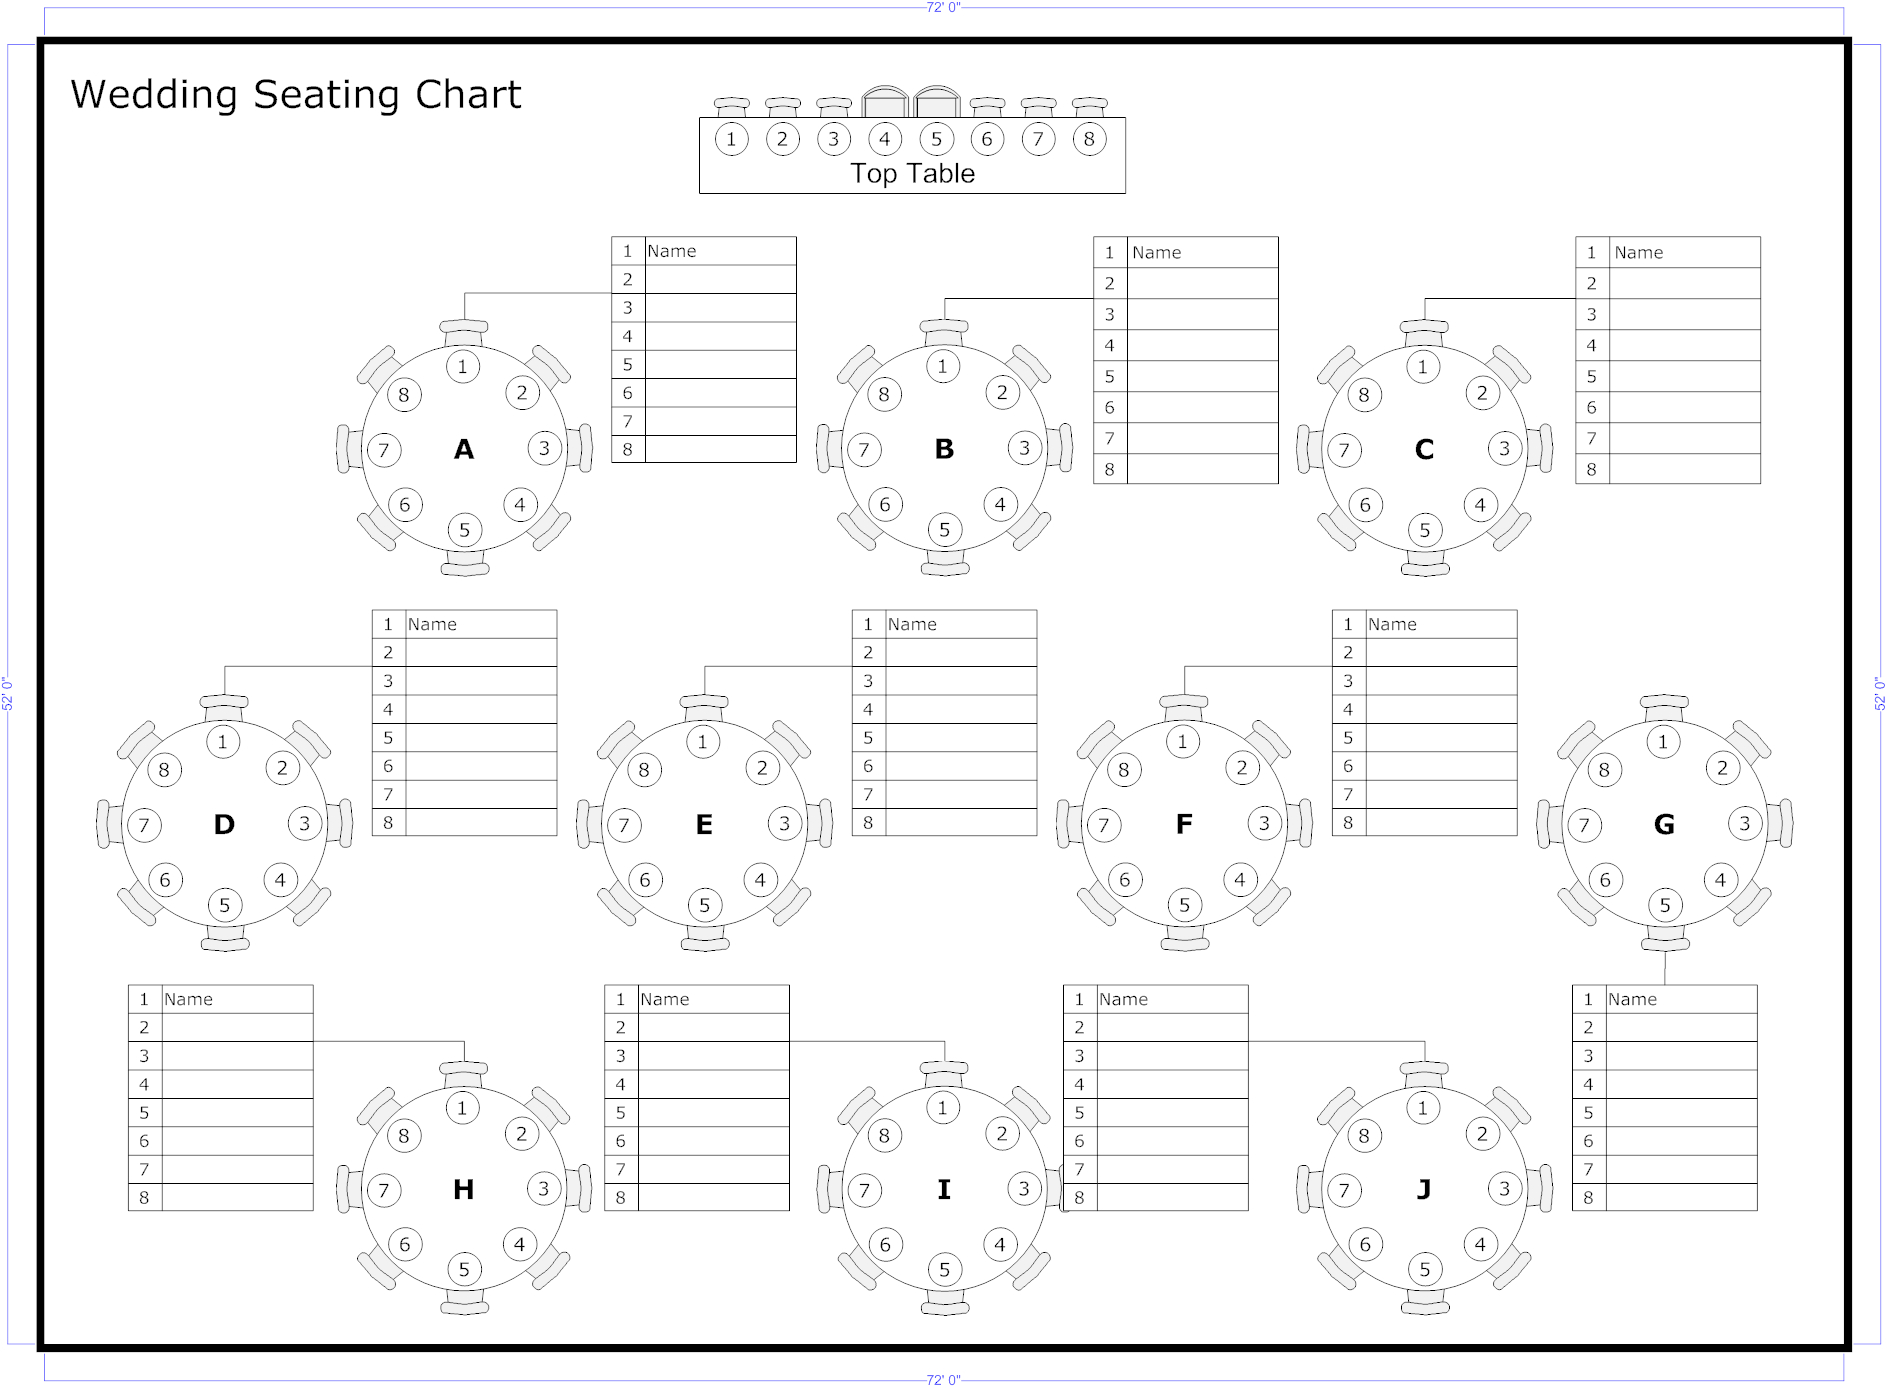 Tips To Seat Your Wedding Guests | Wedding Ideas | Seating Chart - Free Printable Wedding Seating Chart Template